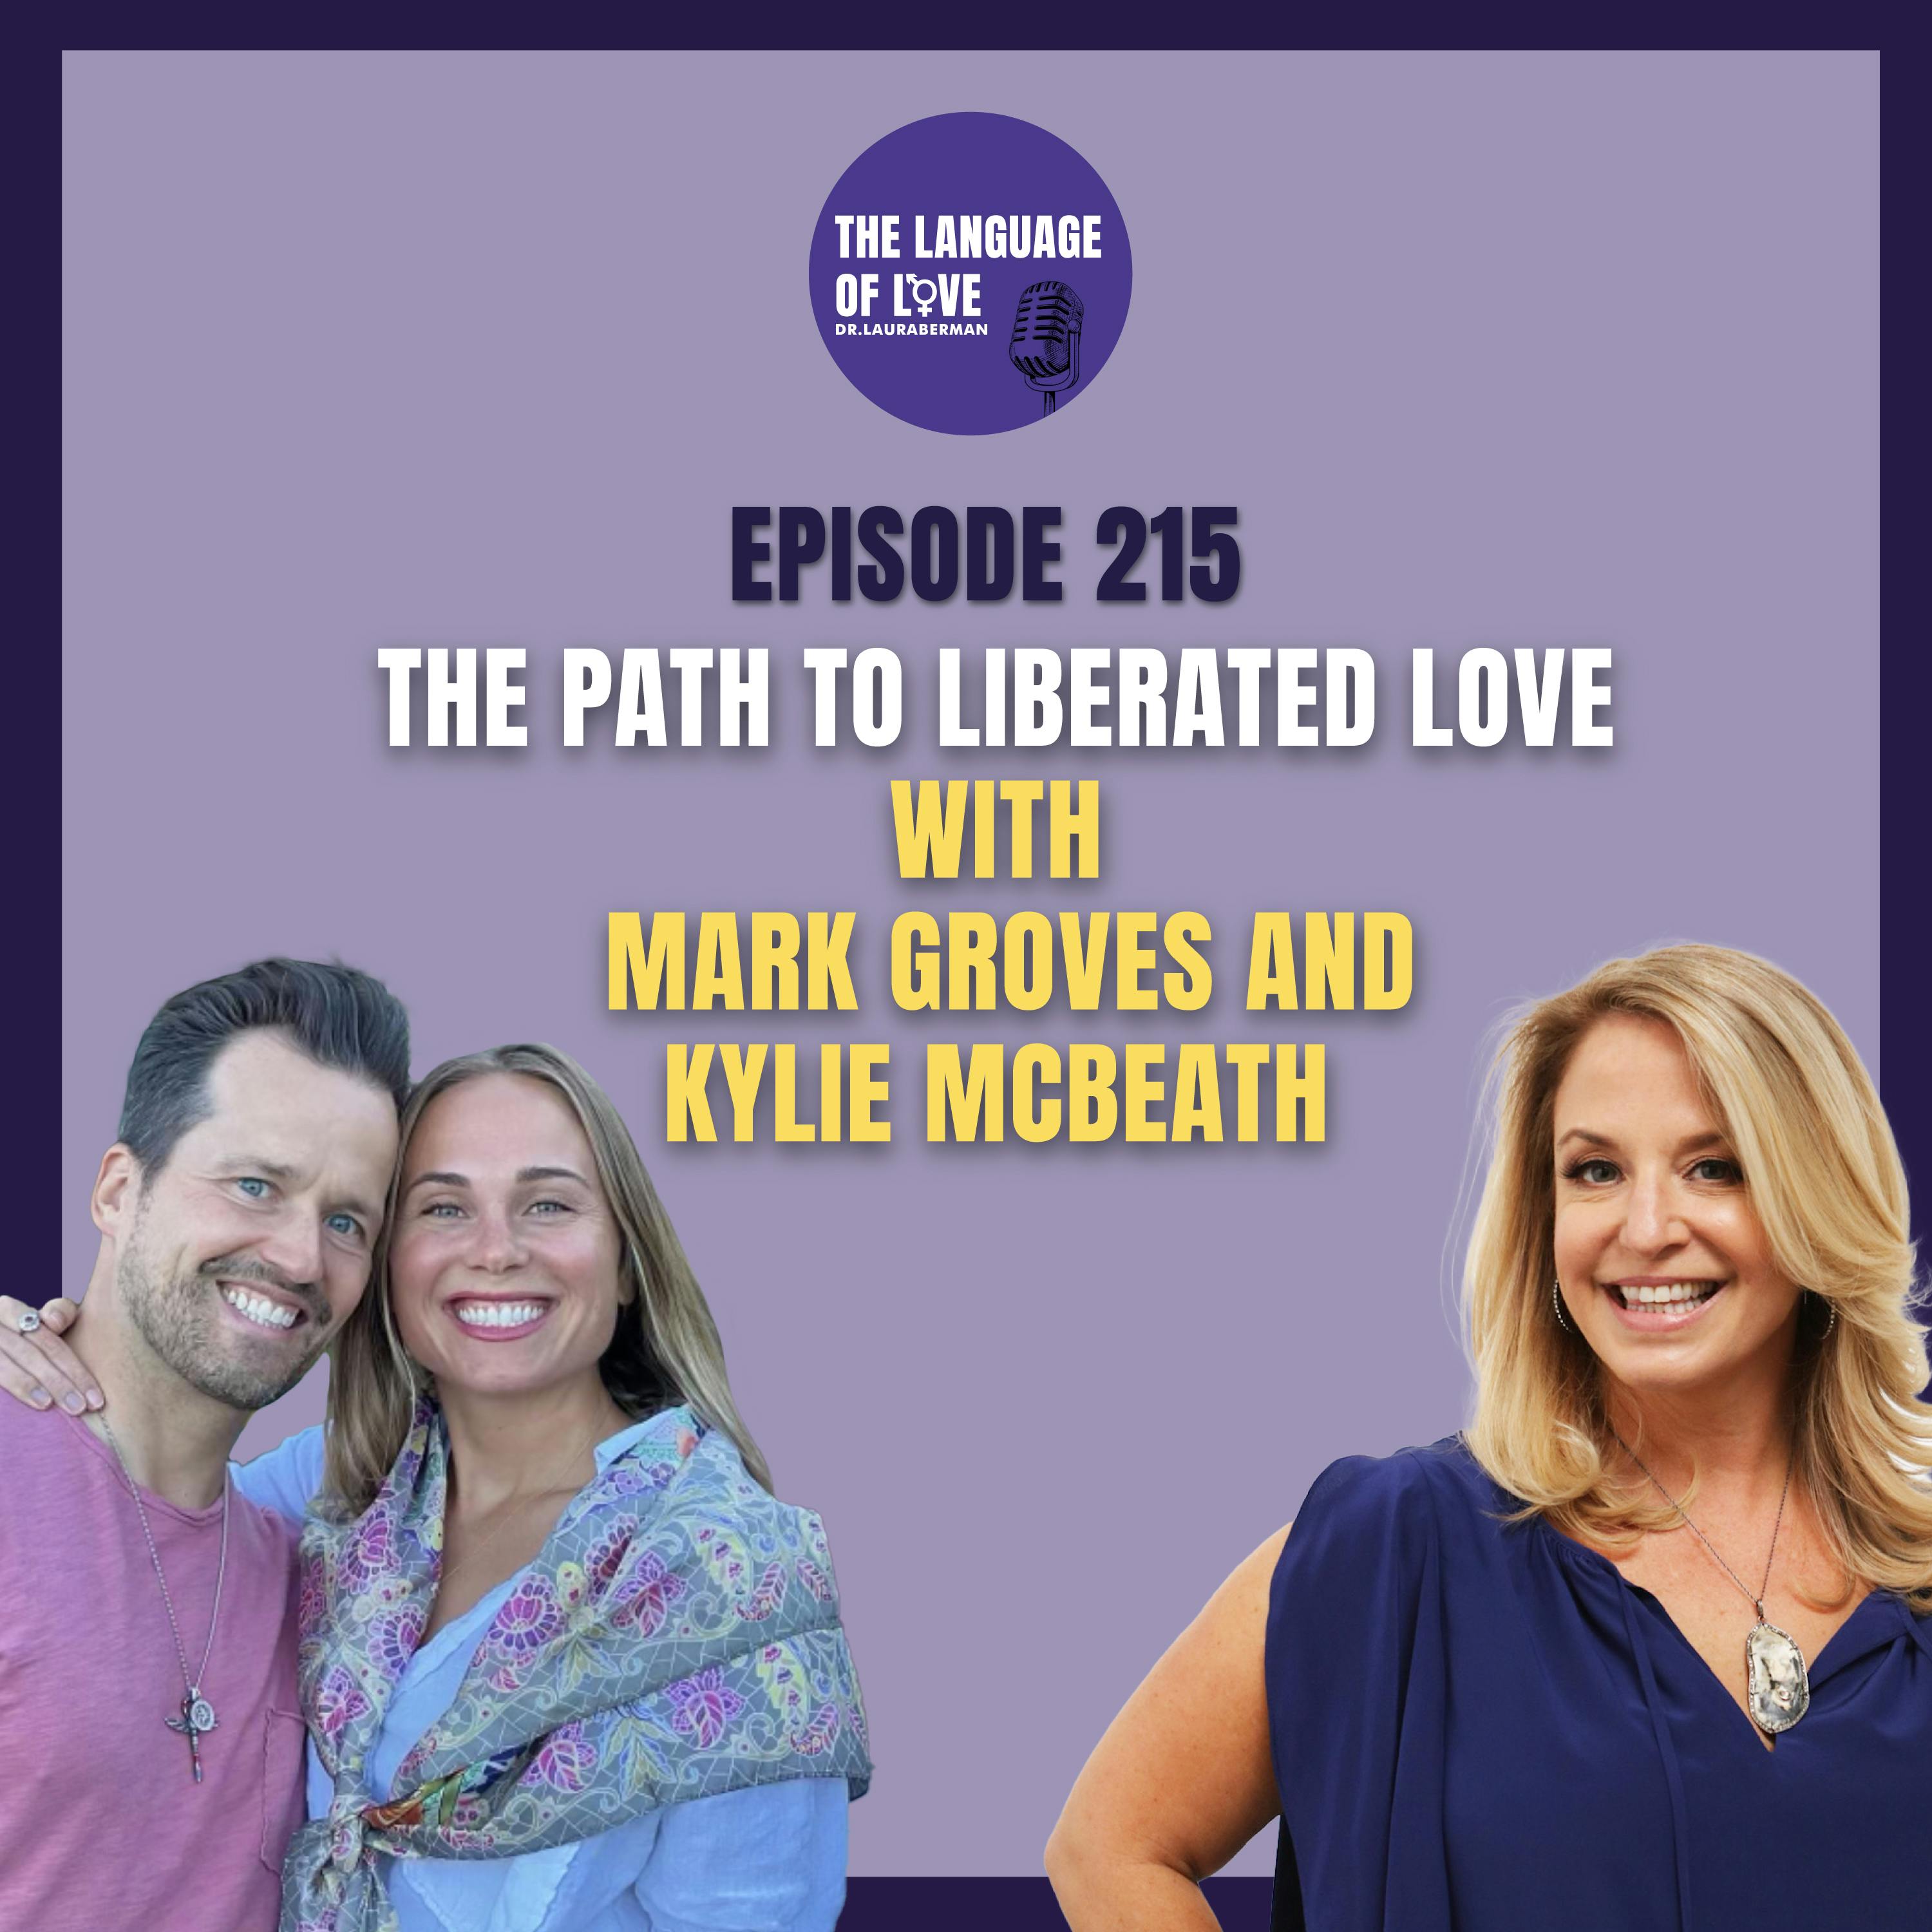 The Path to Liberated Love with Mark Groves and Kylie McBeath